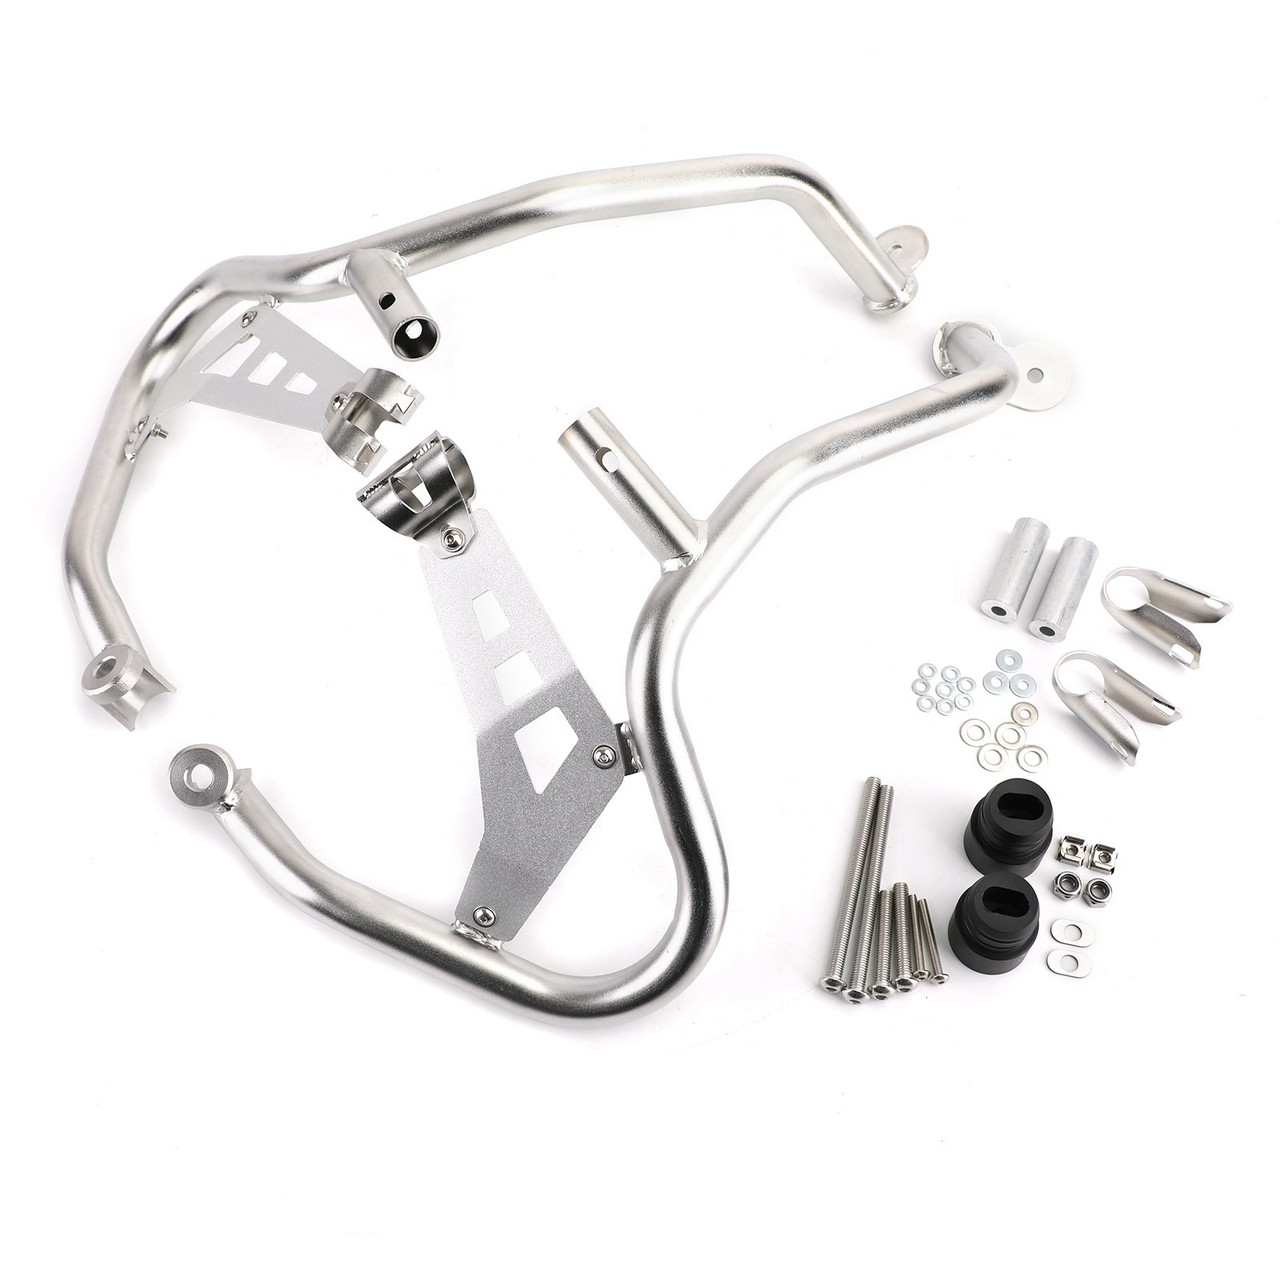 Front Tank Crash Bars Extension Engine Protector Guard Bumper Fit For BMW R1250GS Adventure 18-21 Silver